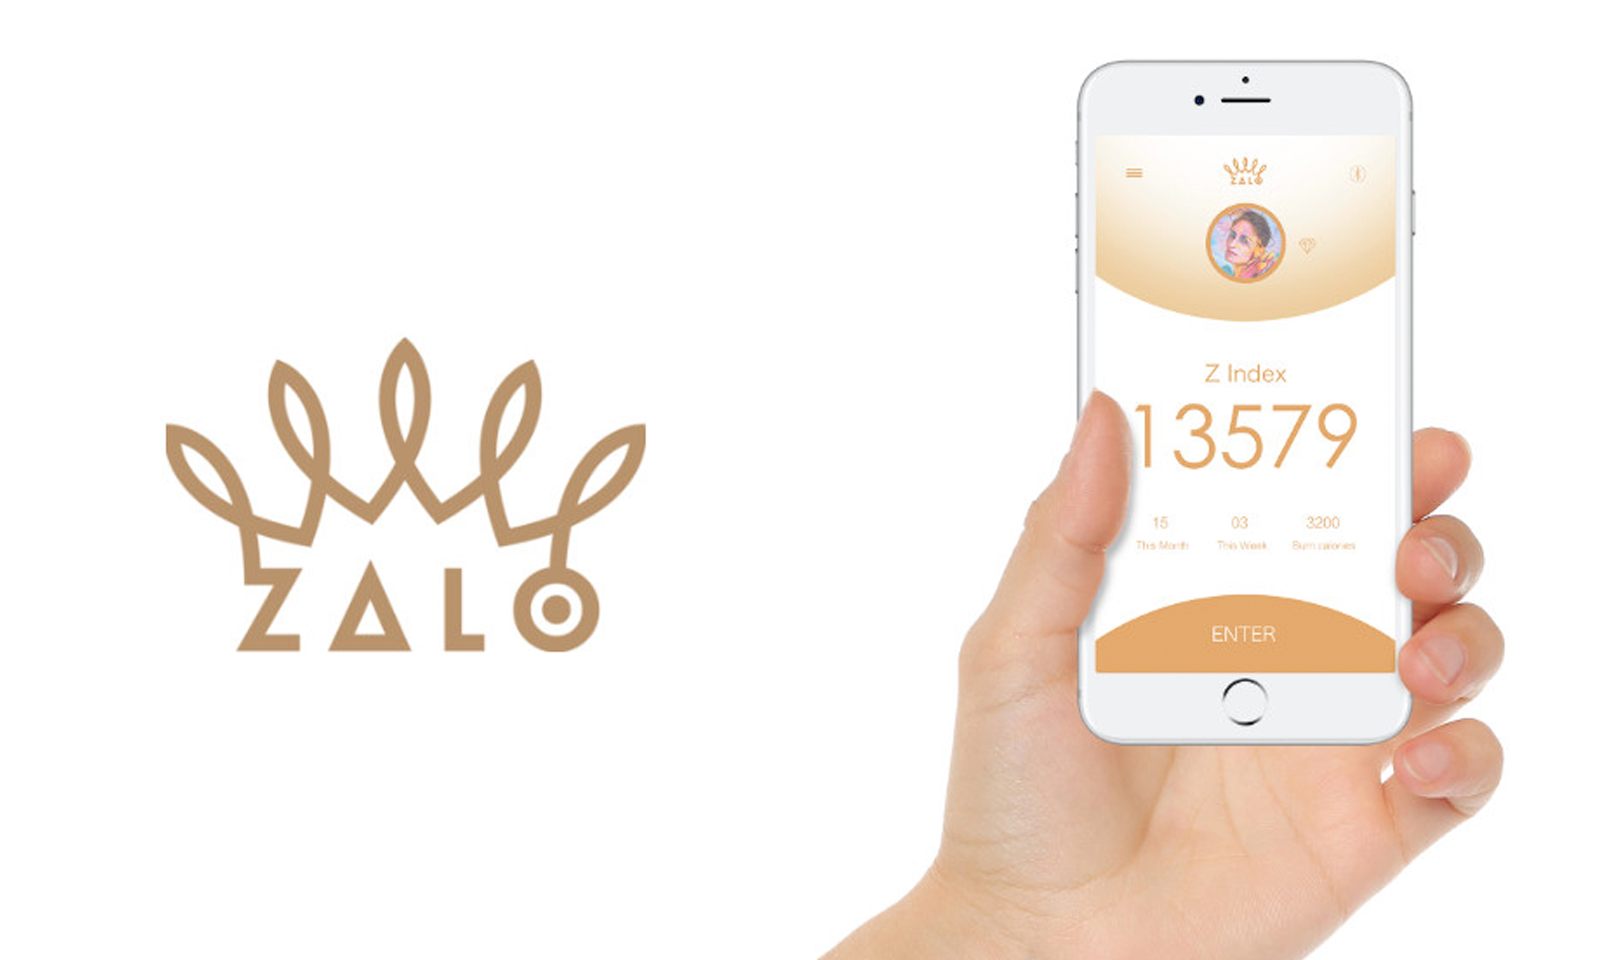 Zalo USA’s App, Survey Results Featured in Daily Mail